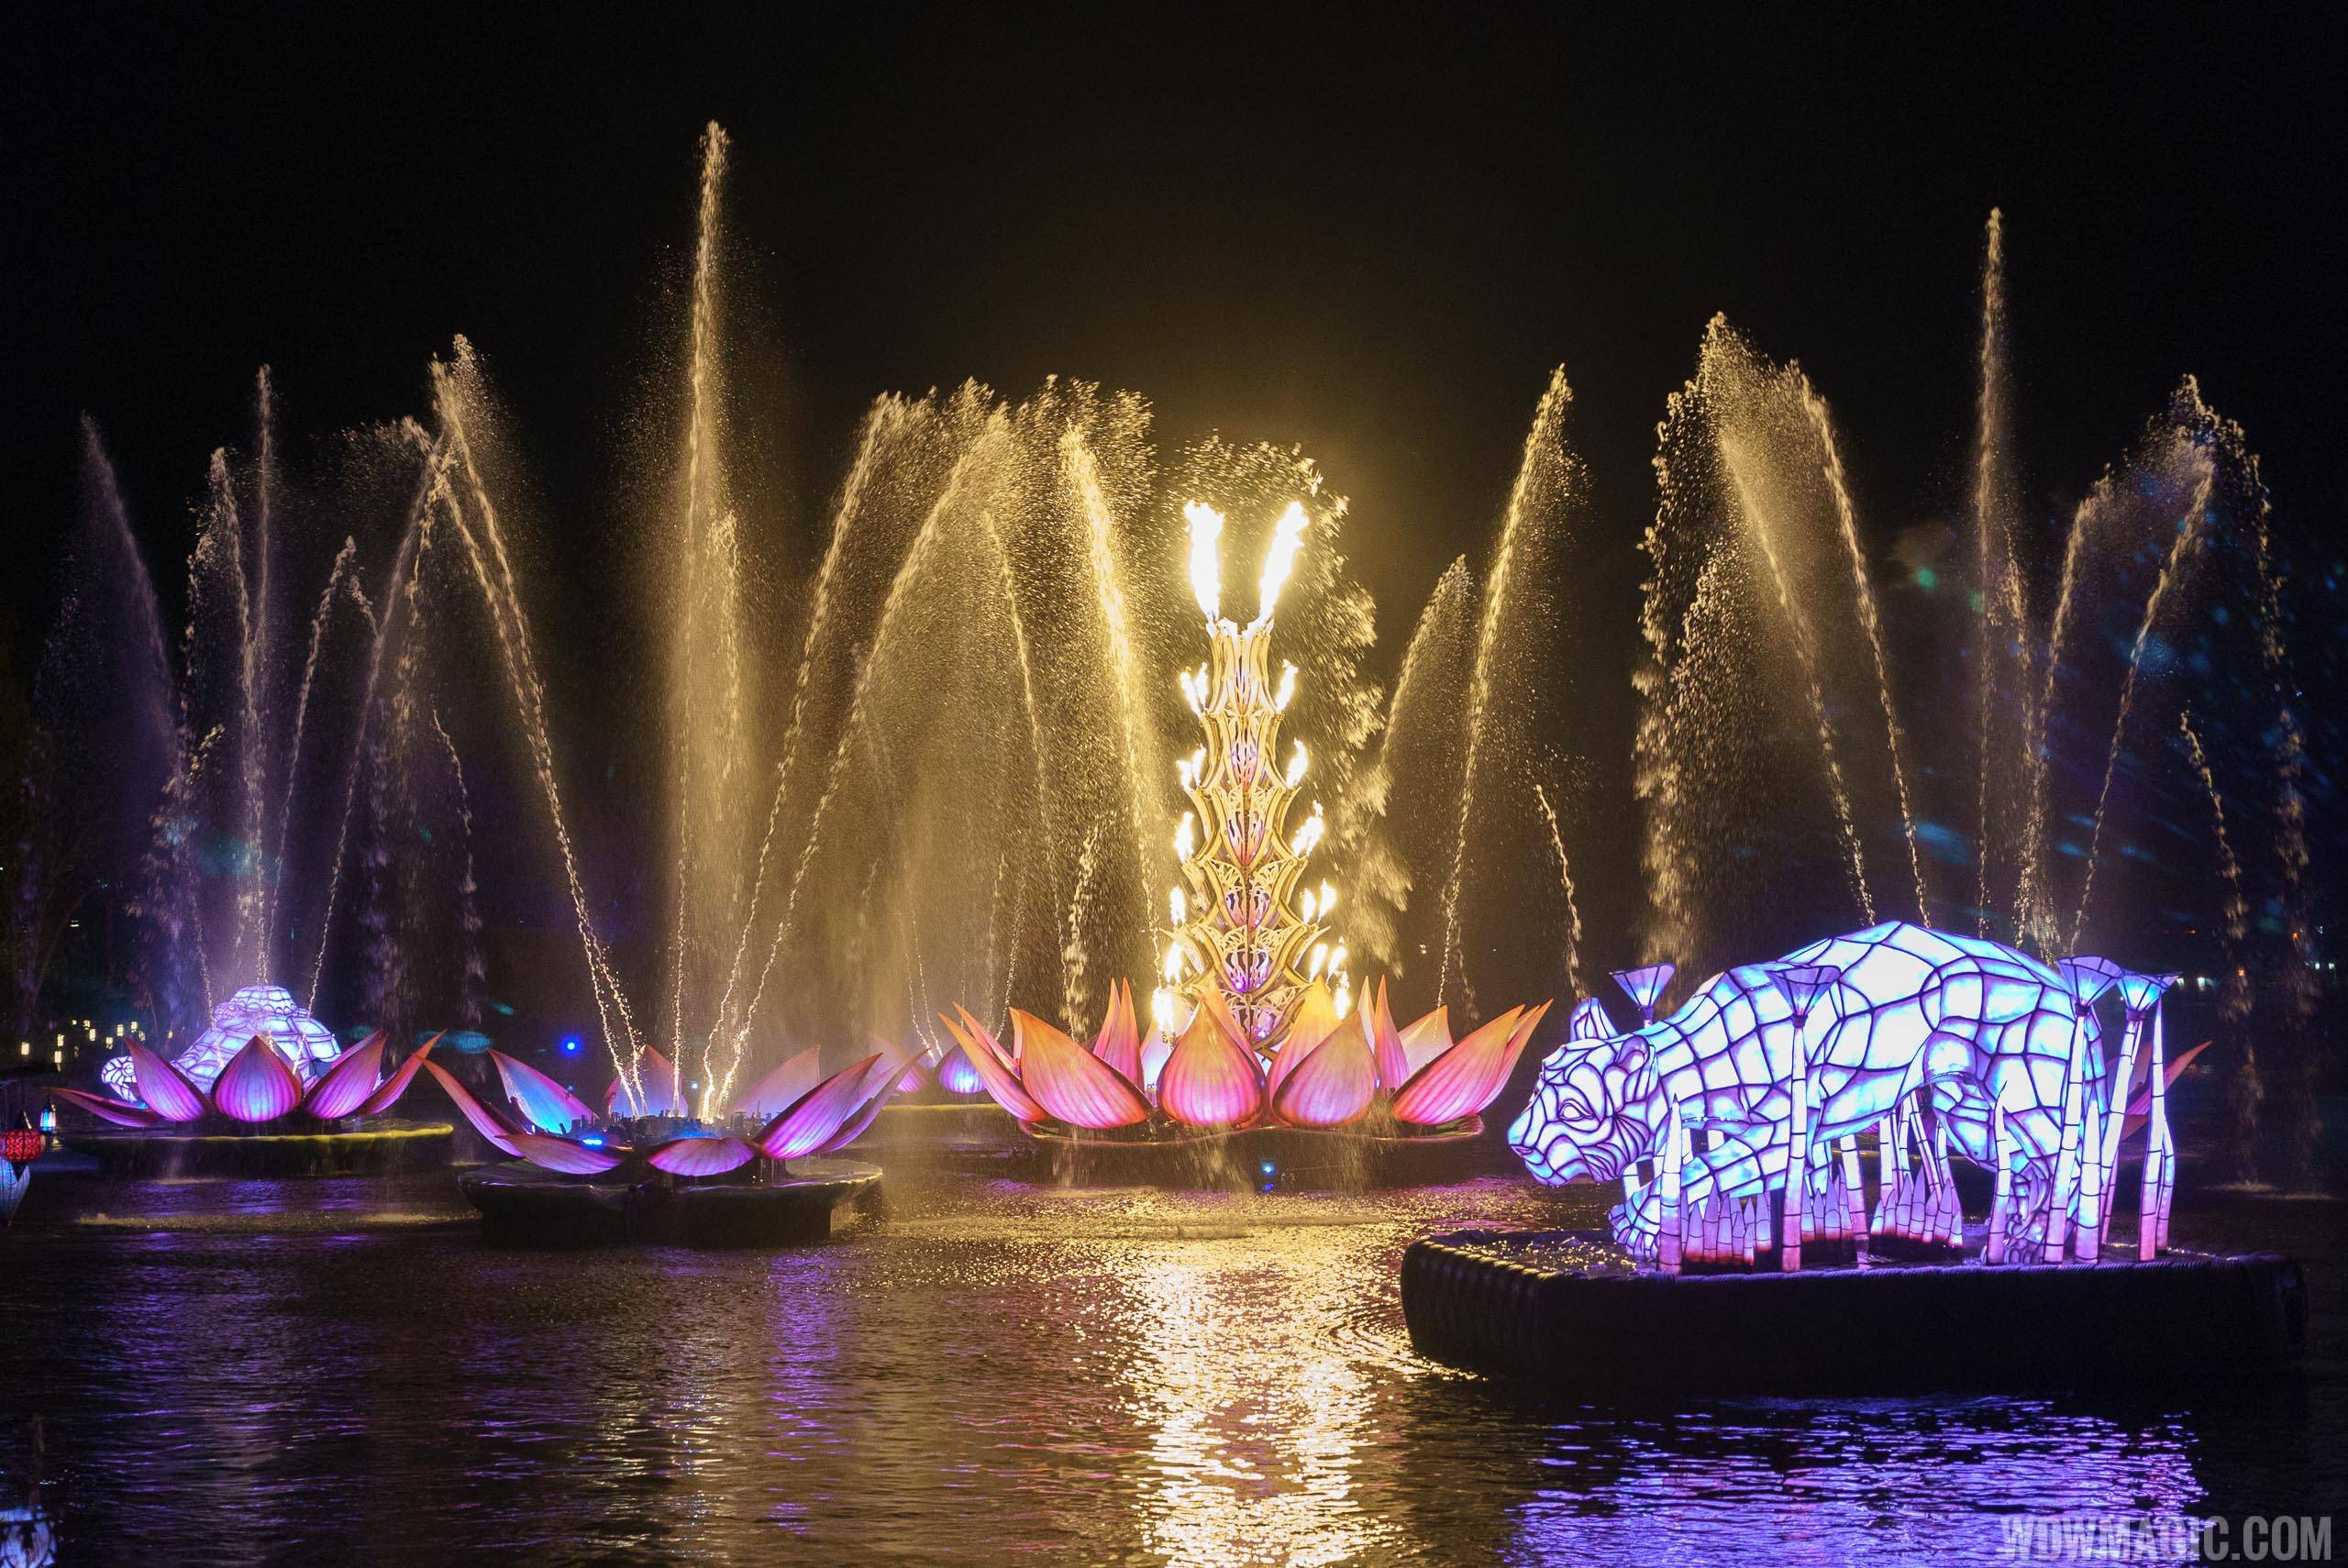 More performances of Rivers of Light added at Disney's Animal Kingdom